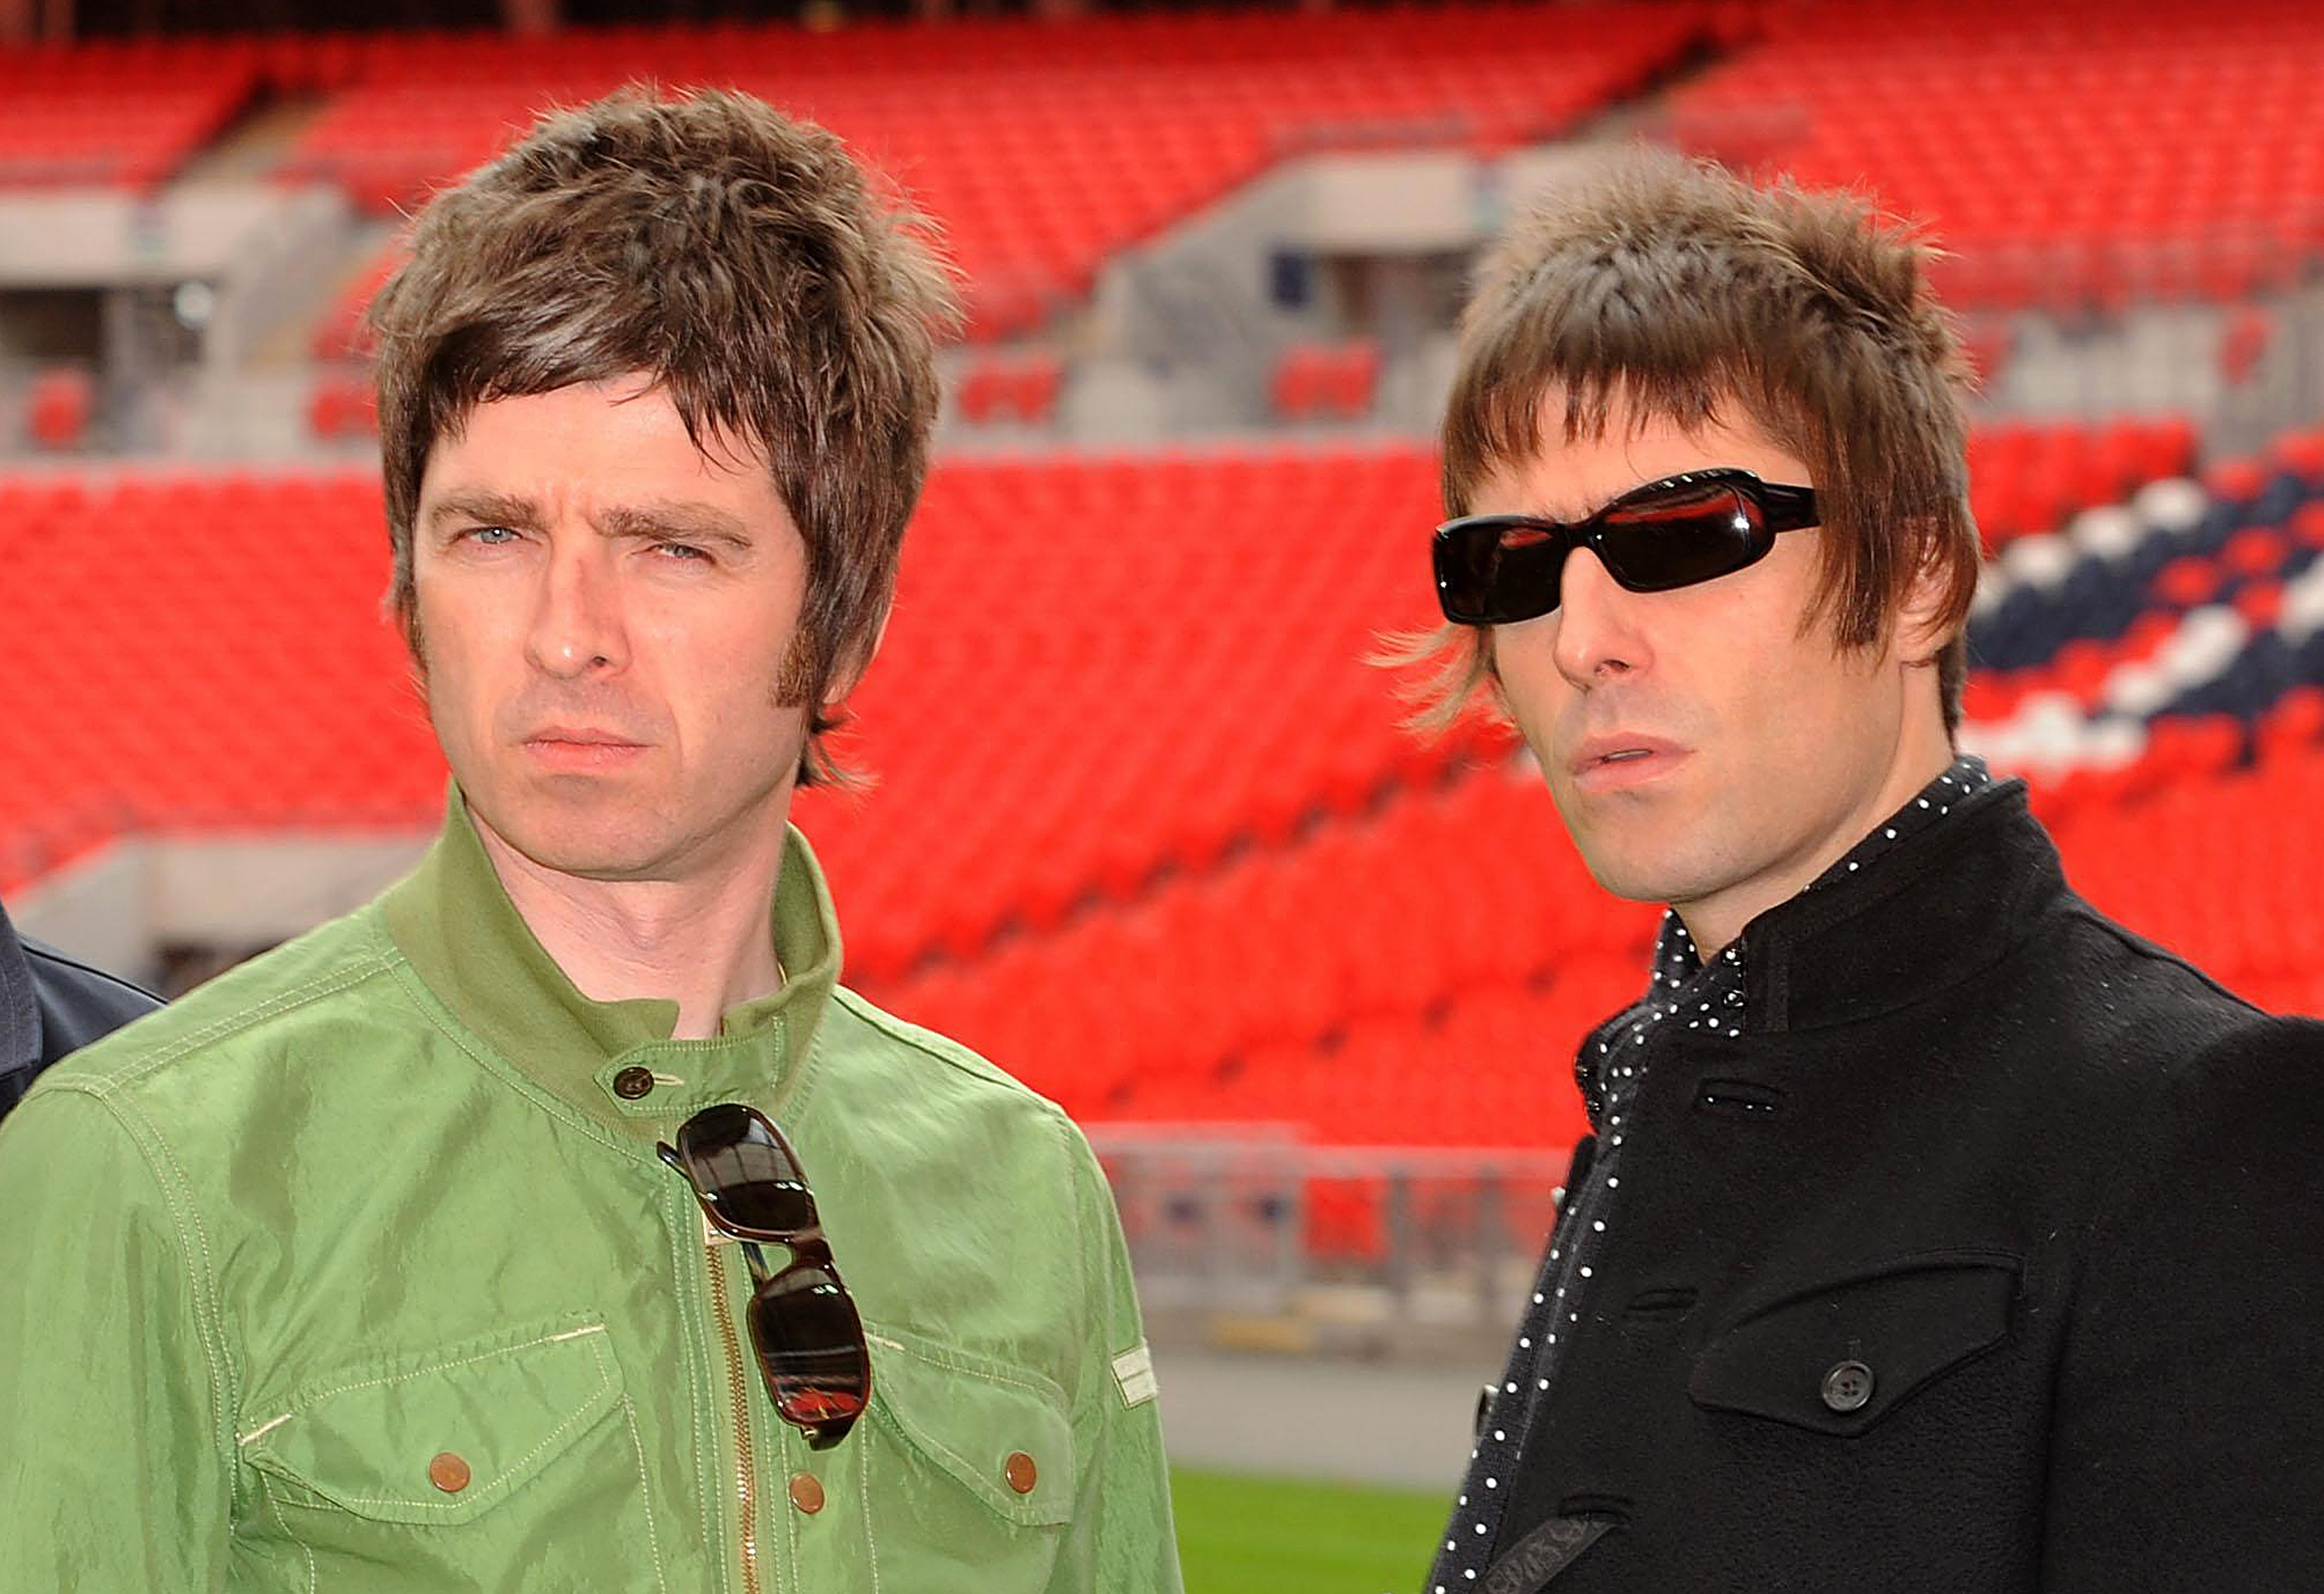 Liam Gallagher, Noel Gallagher insults, Best insults, Gallagher brothers, 3000x2060 HD Desktop